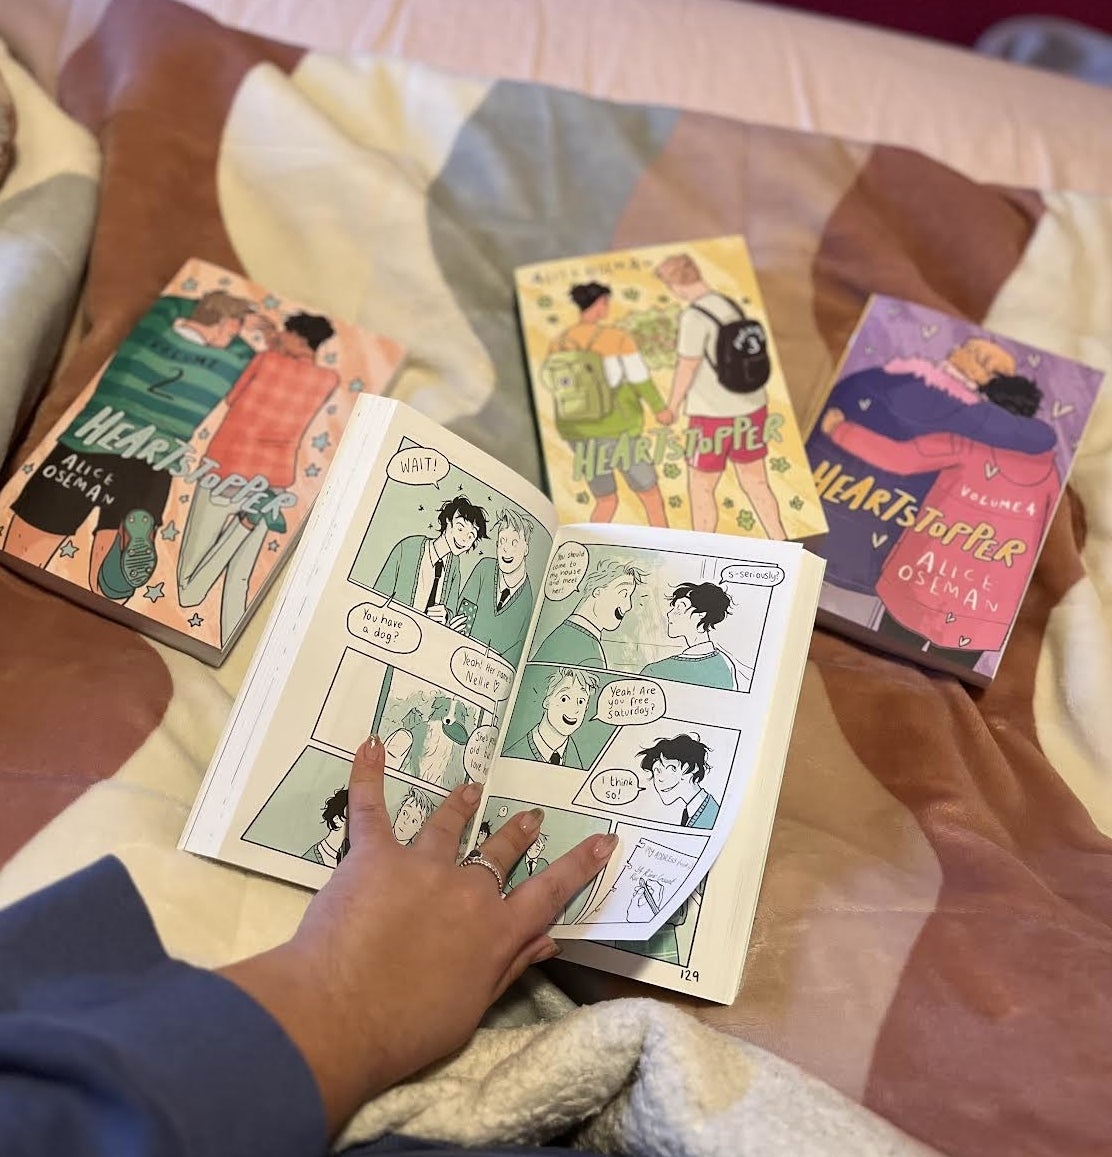 a photo of Bianca reading the graphic novel in bed surrounded by the other volumes